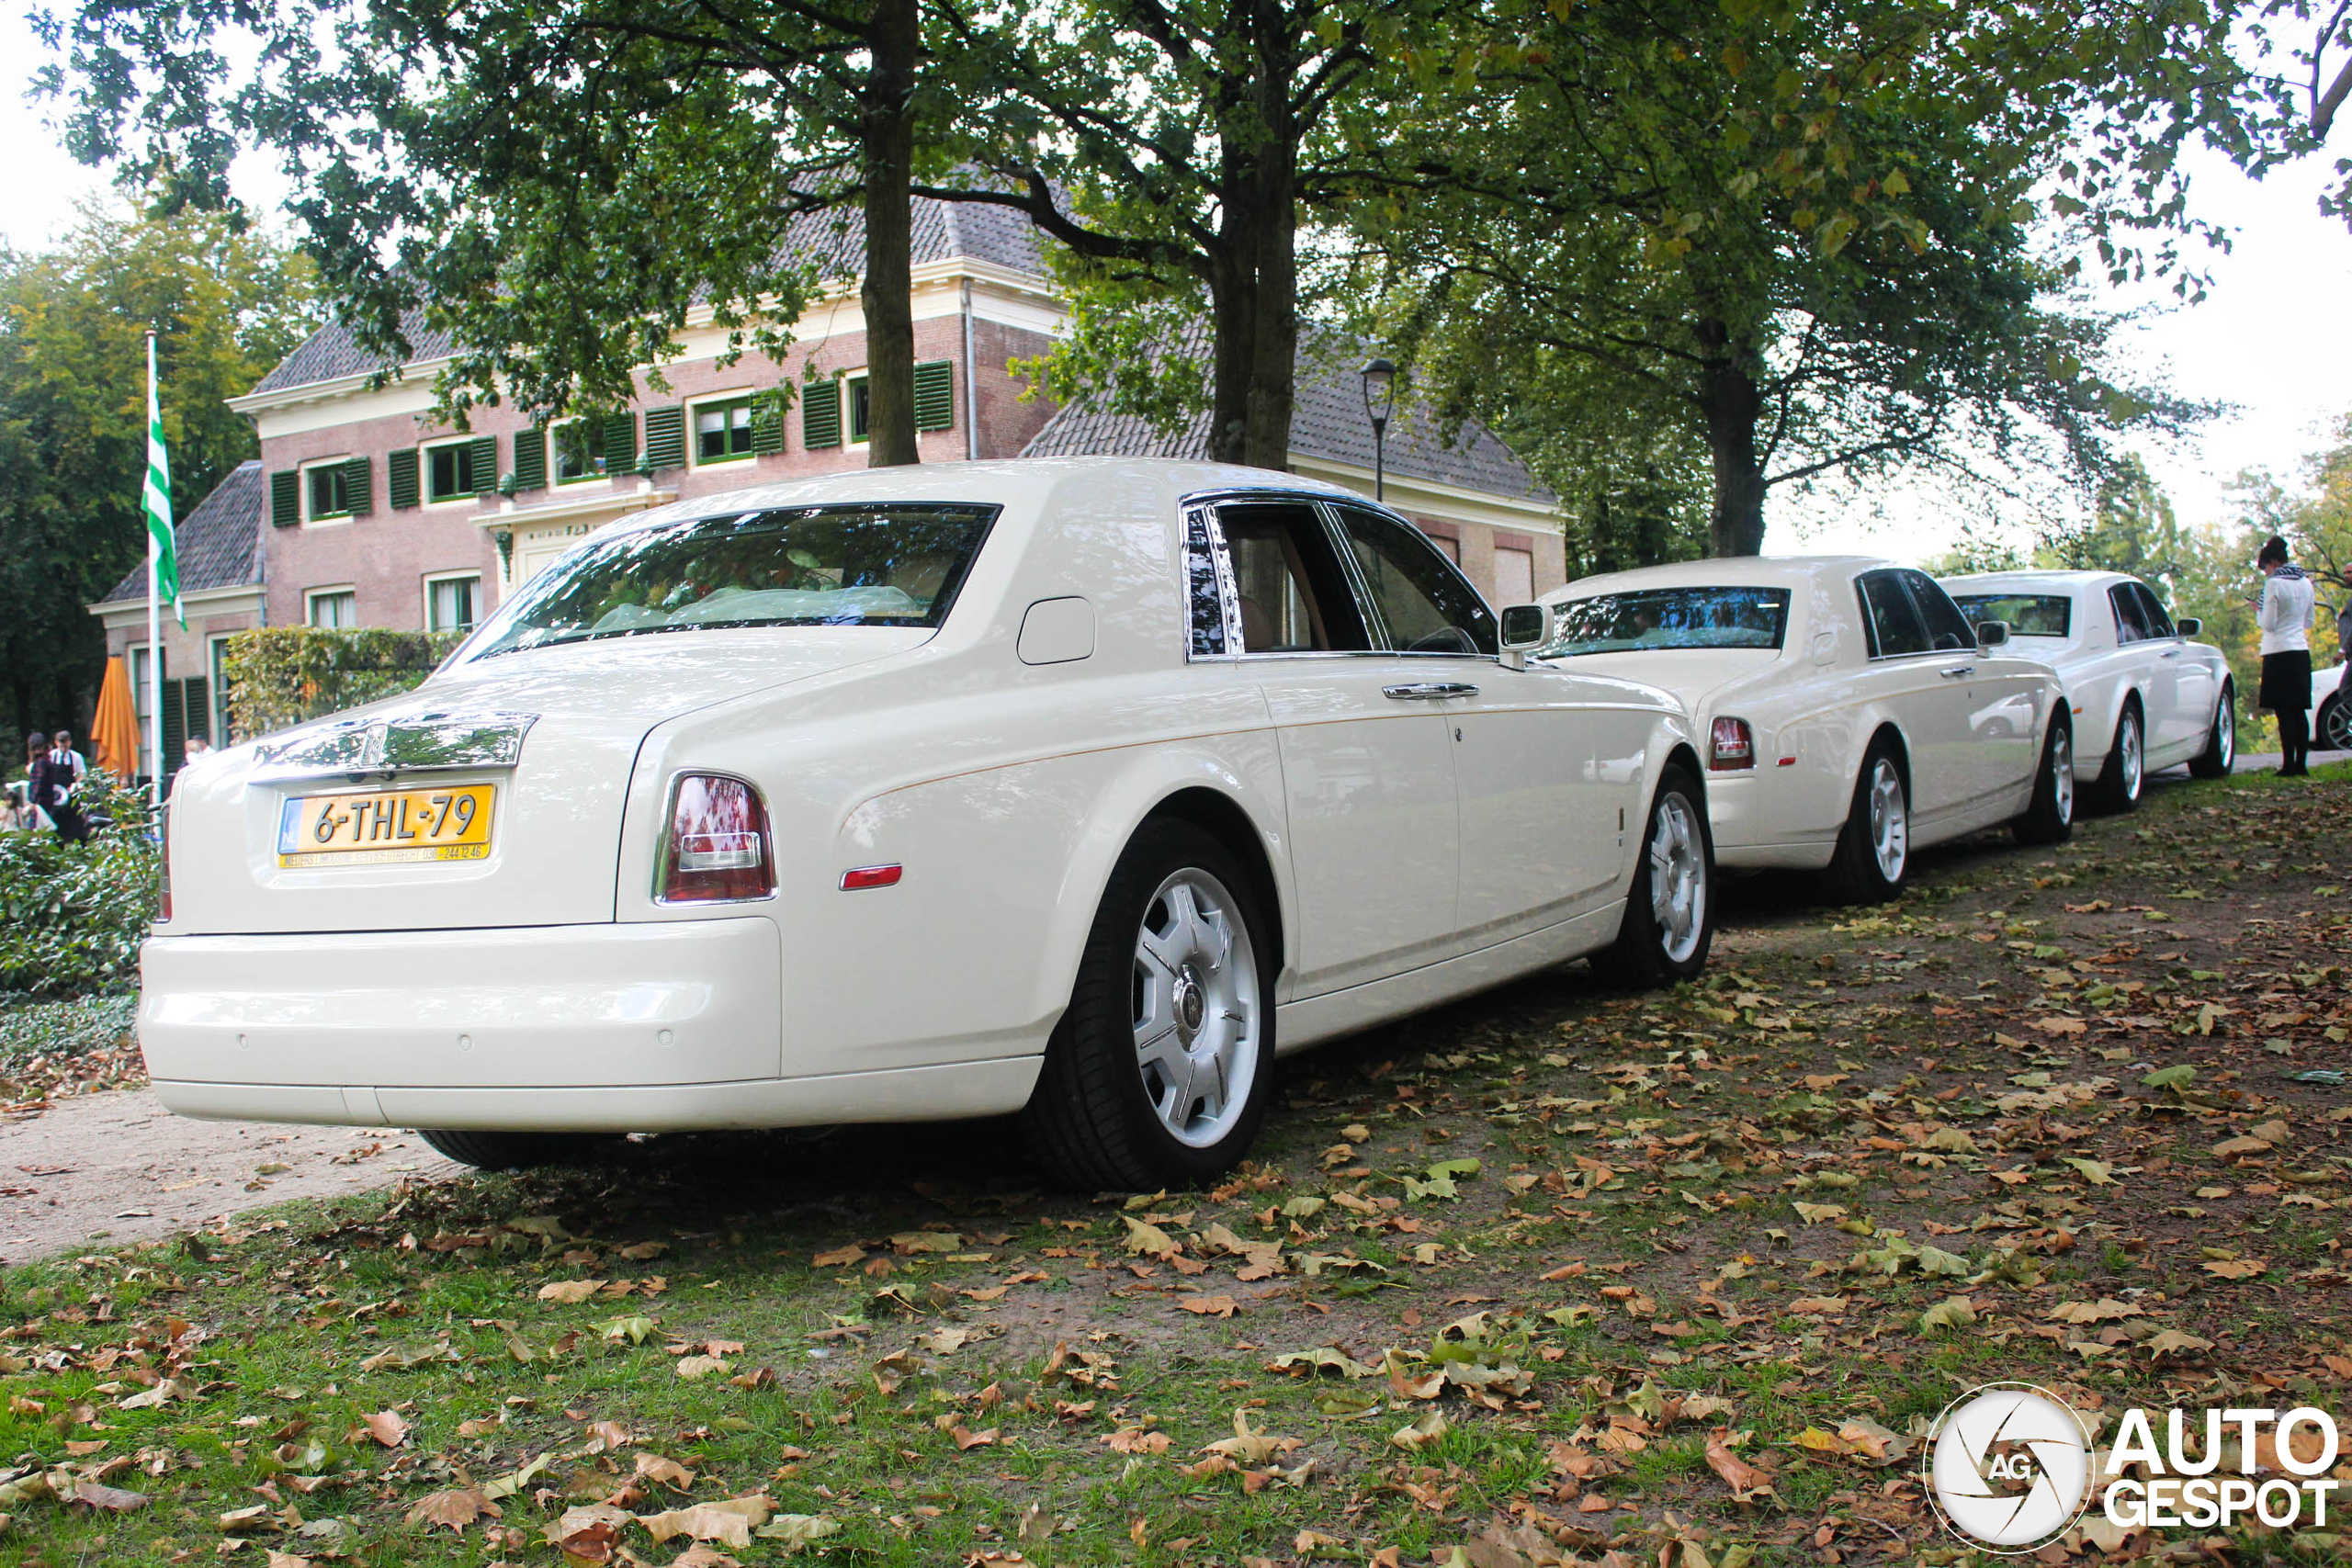 Do you want to arrive like the greatest boss? Then rent these three Phantoms